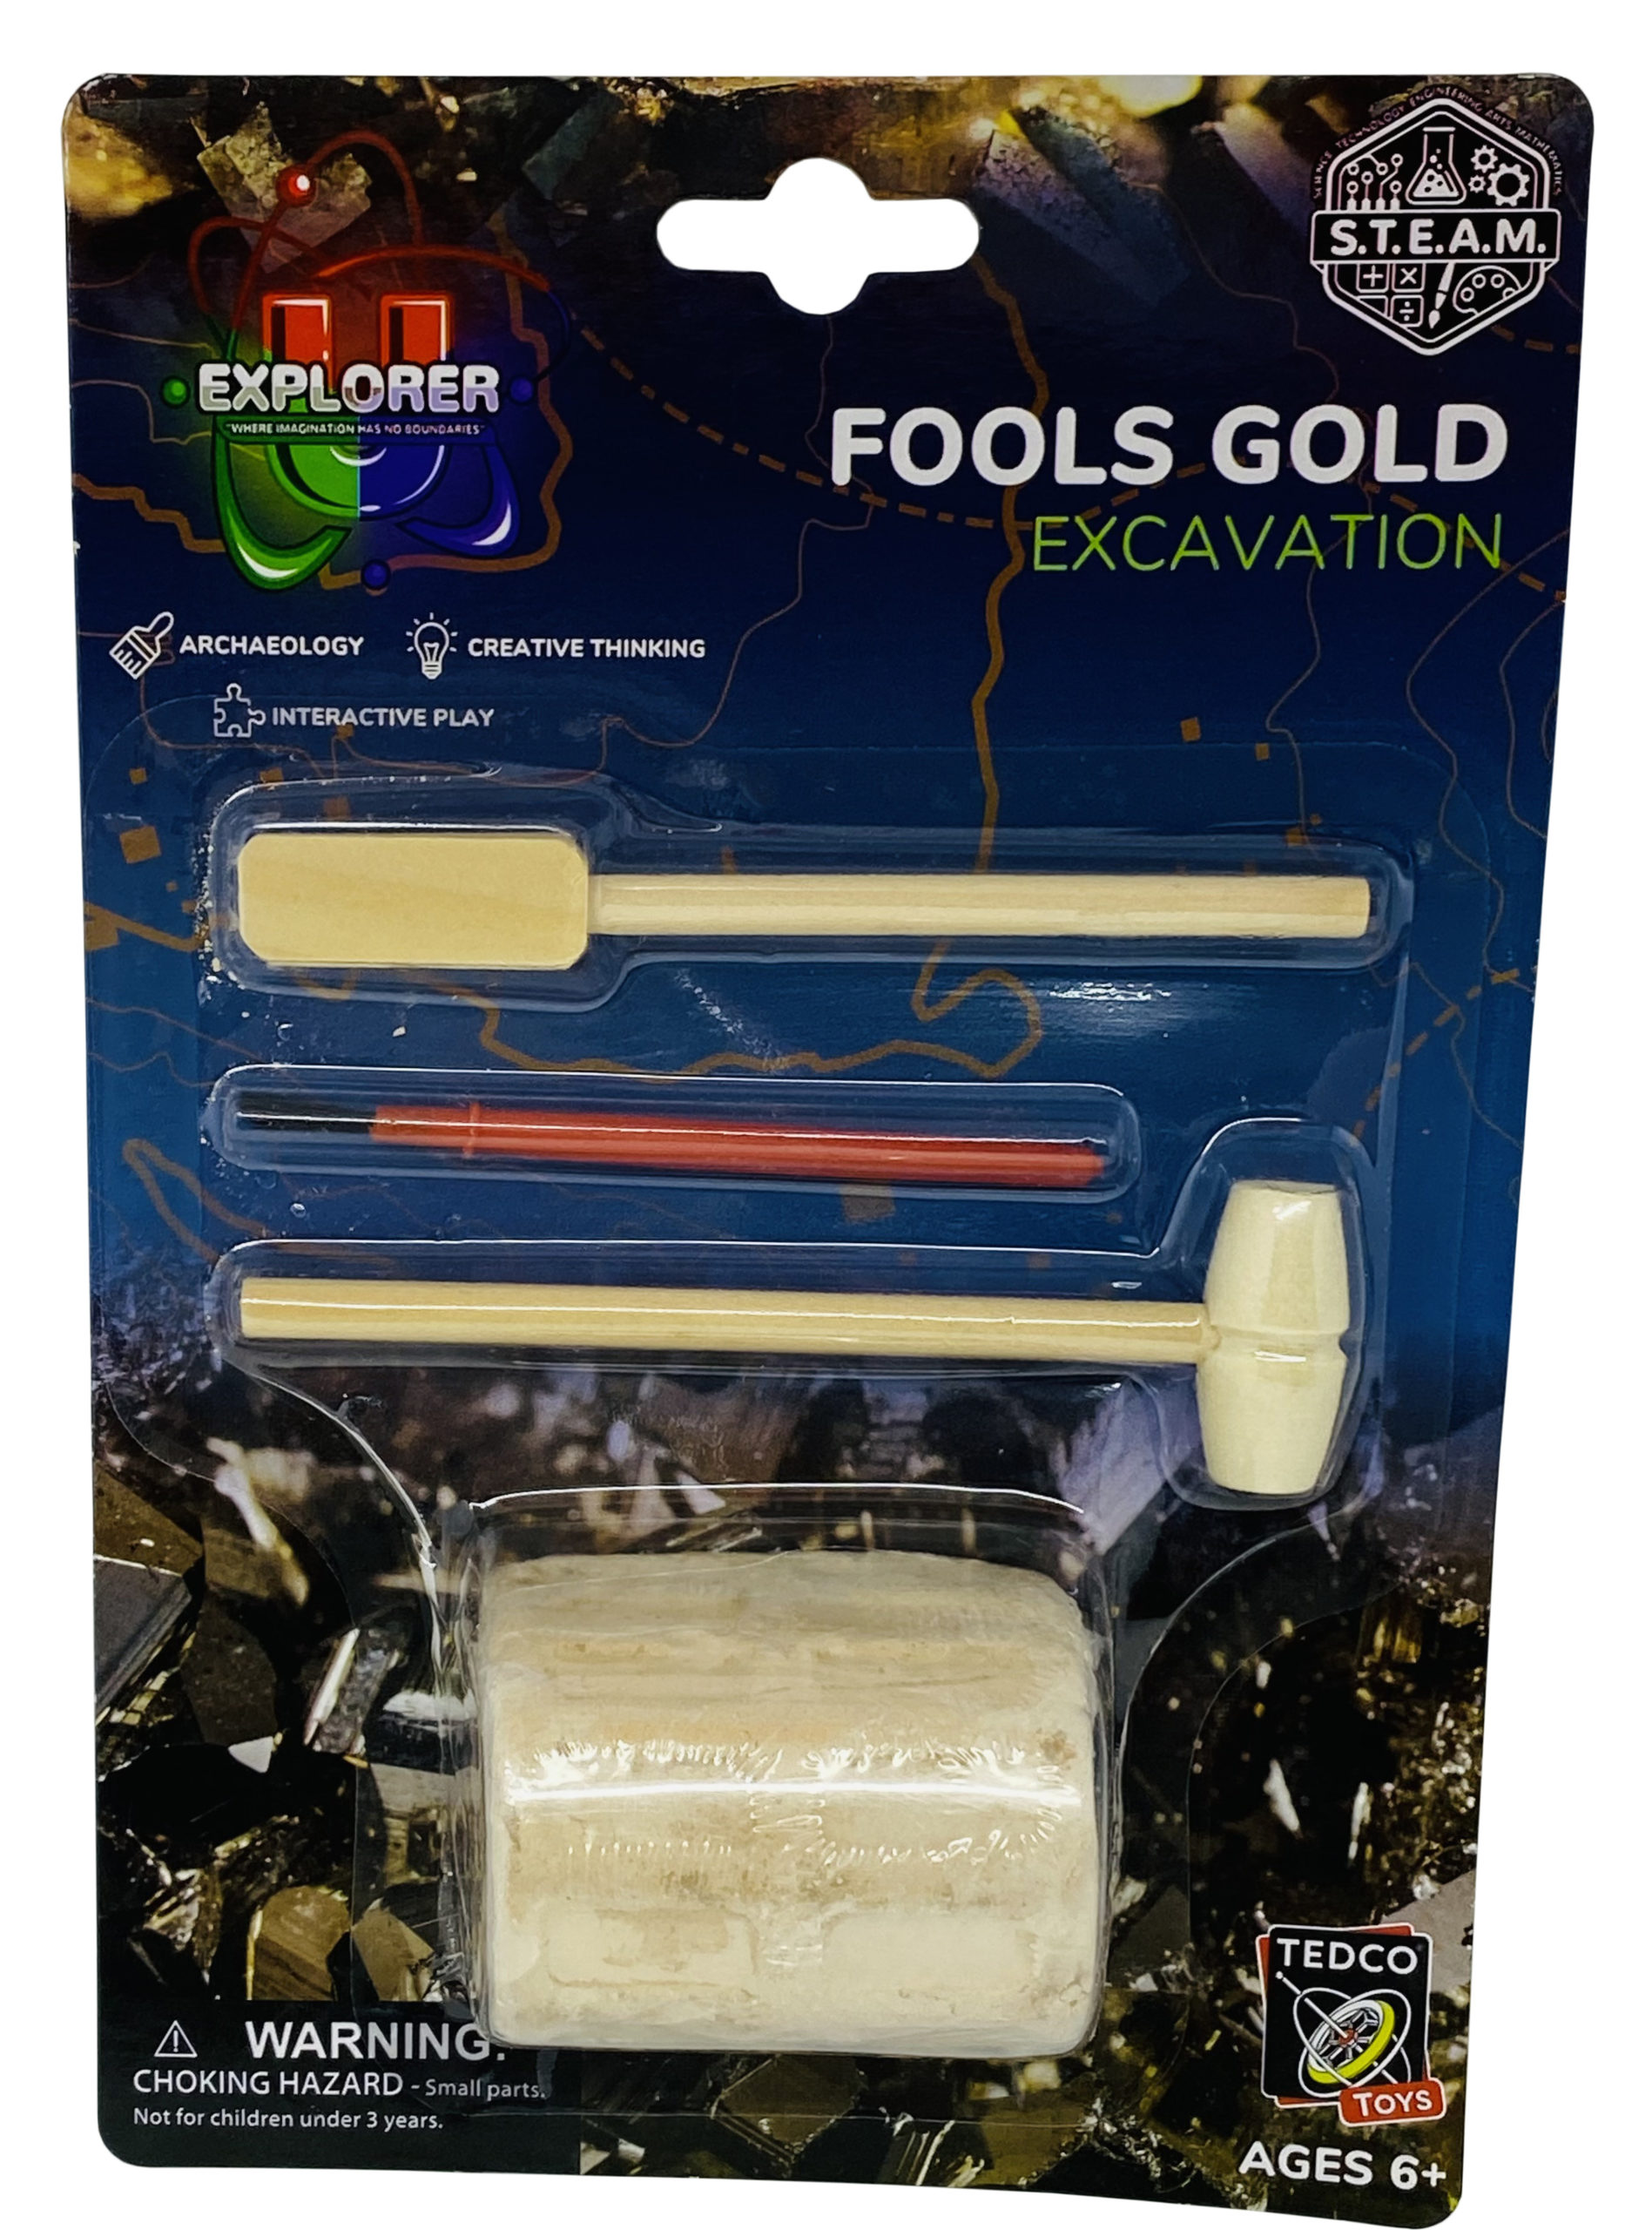 Discovery MINDBLOWN 6 Piece Toy Gold Panning Kit, Excavation Tool Set ()